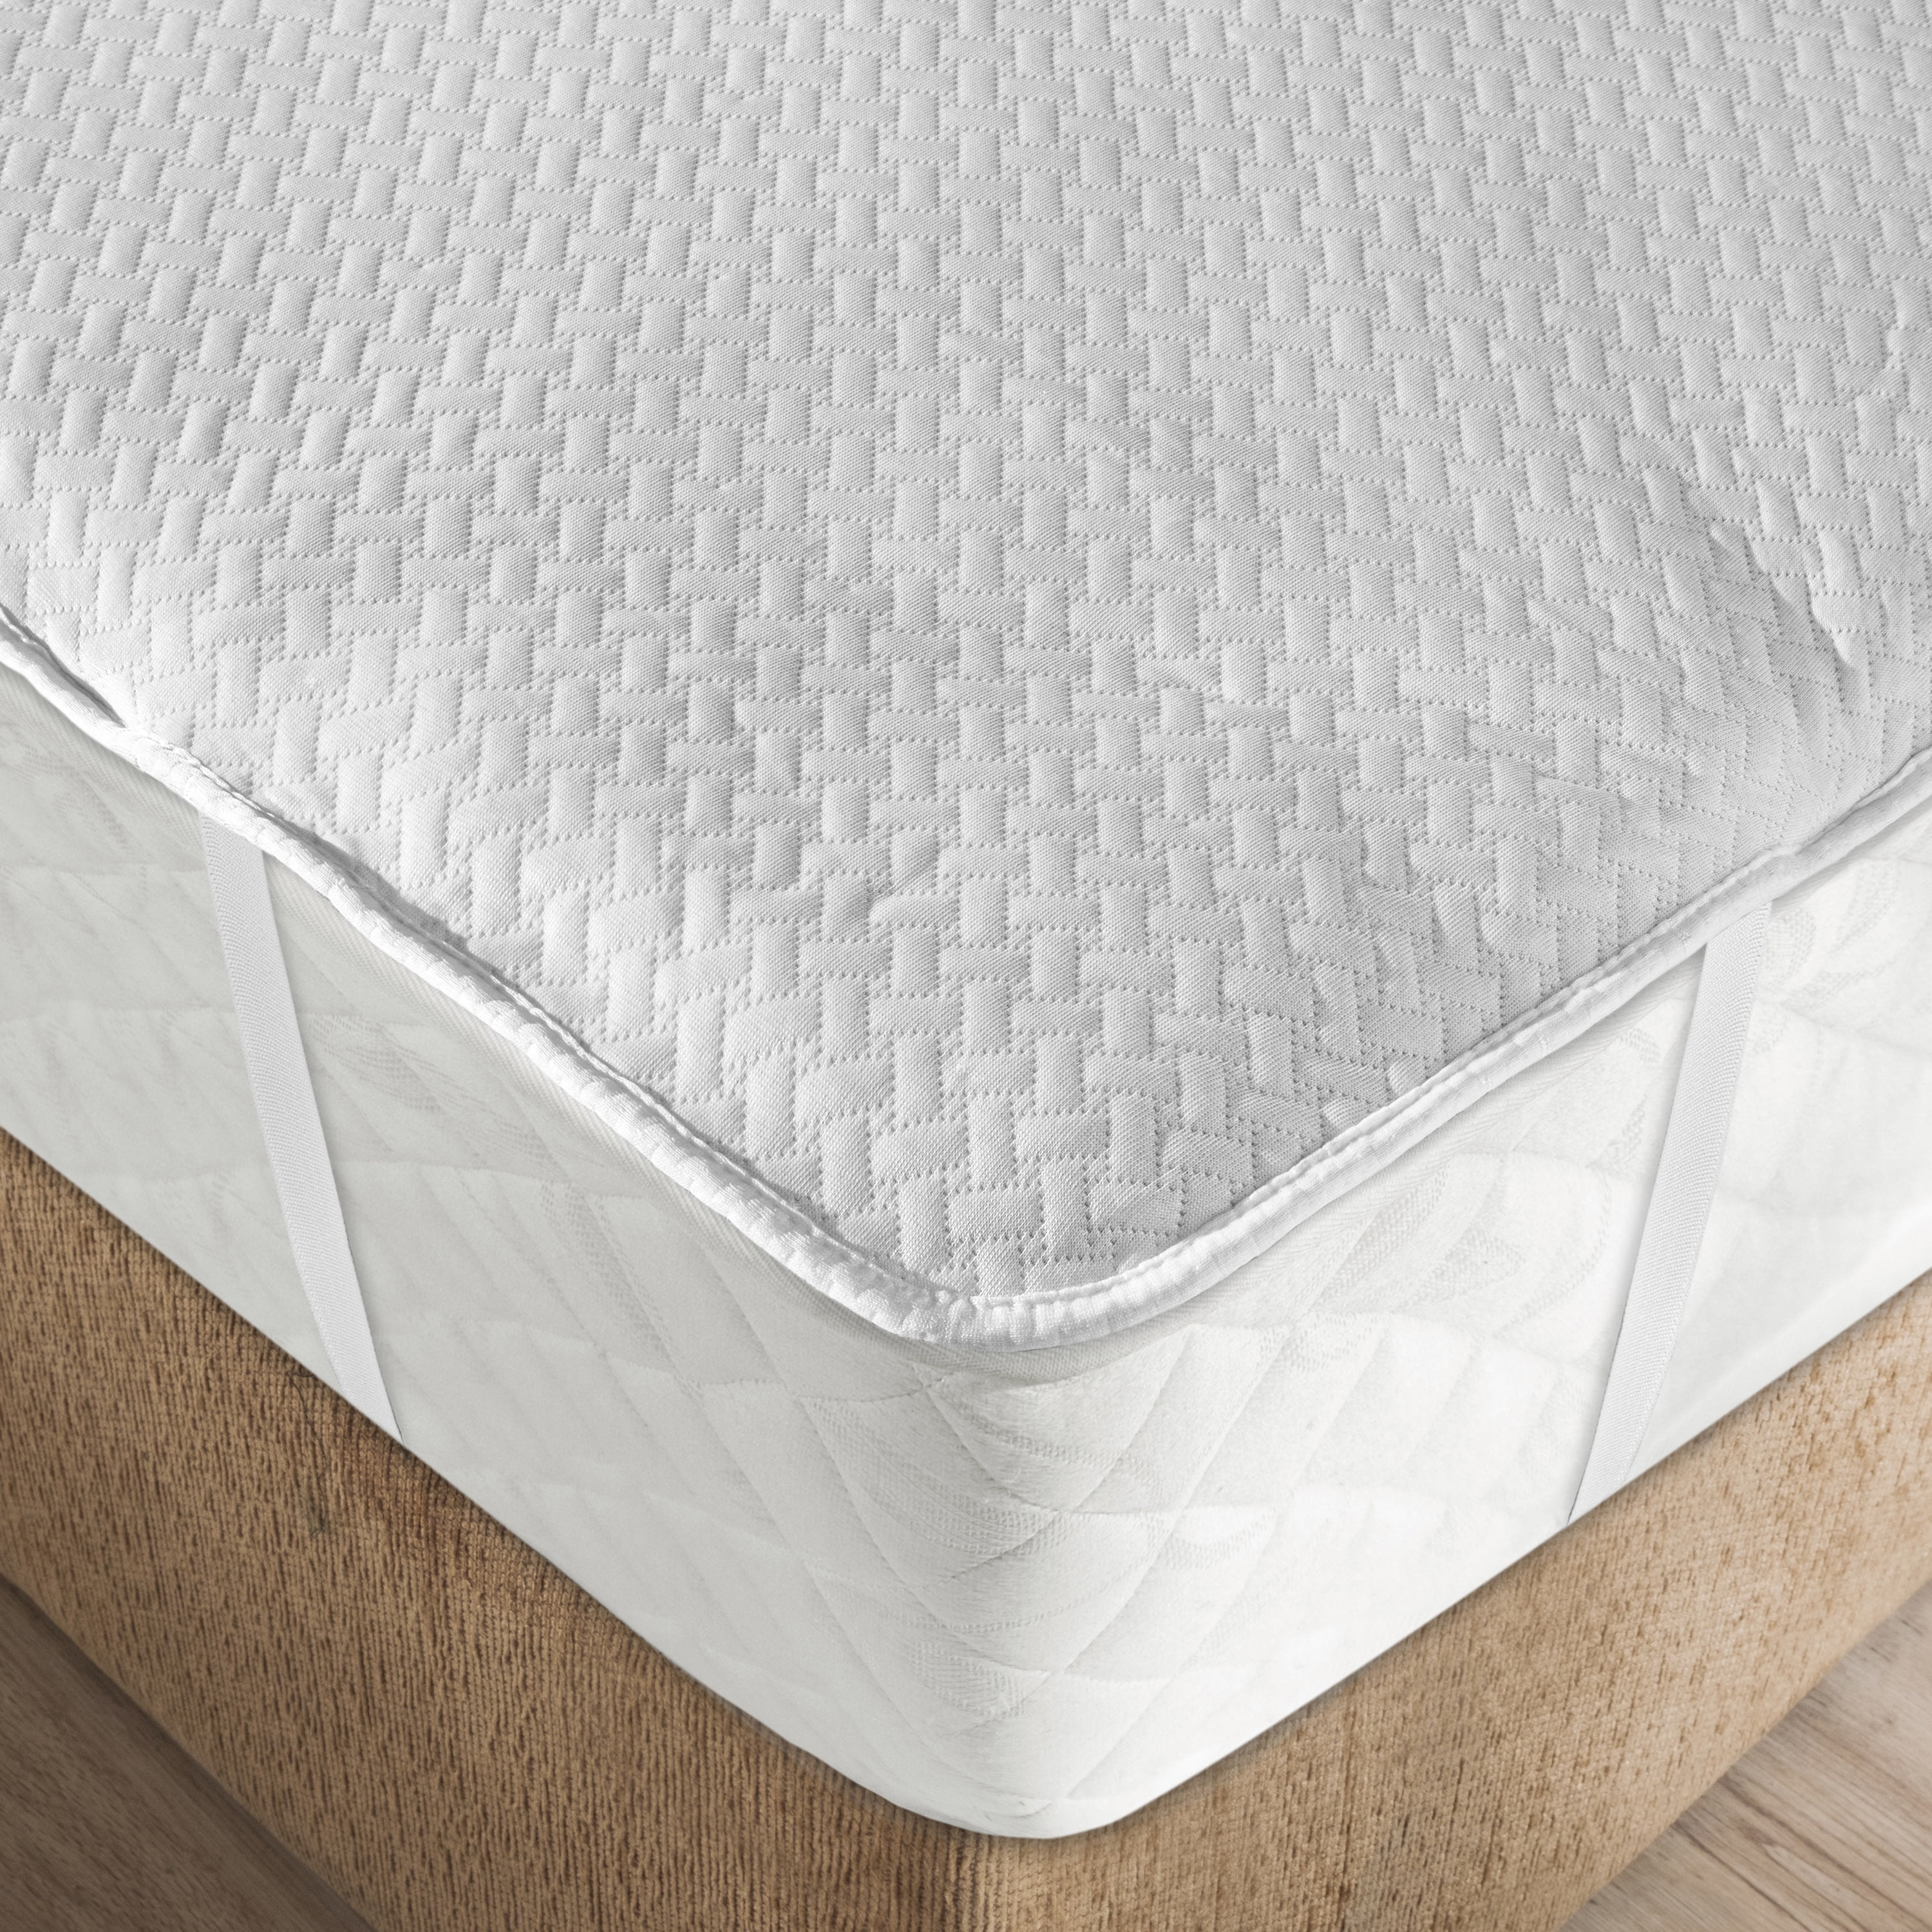 Cot Waterproof Mattress Protector Cover with a High Quality Brushed Cotton To... 